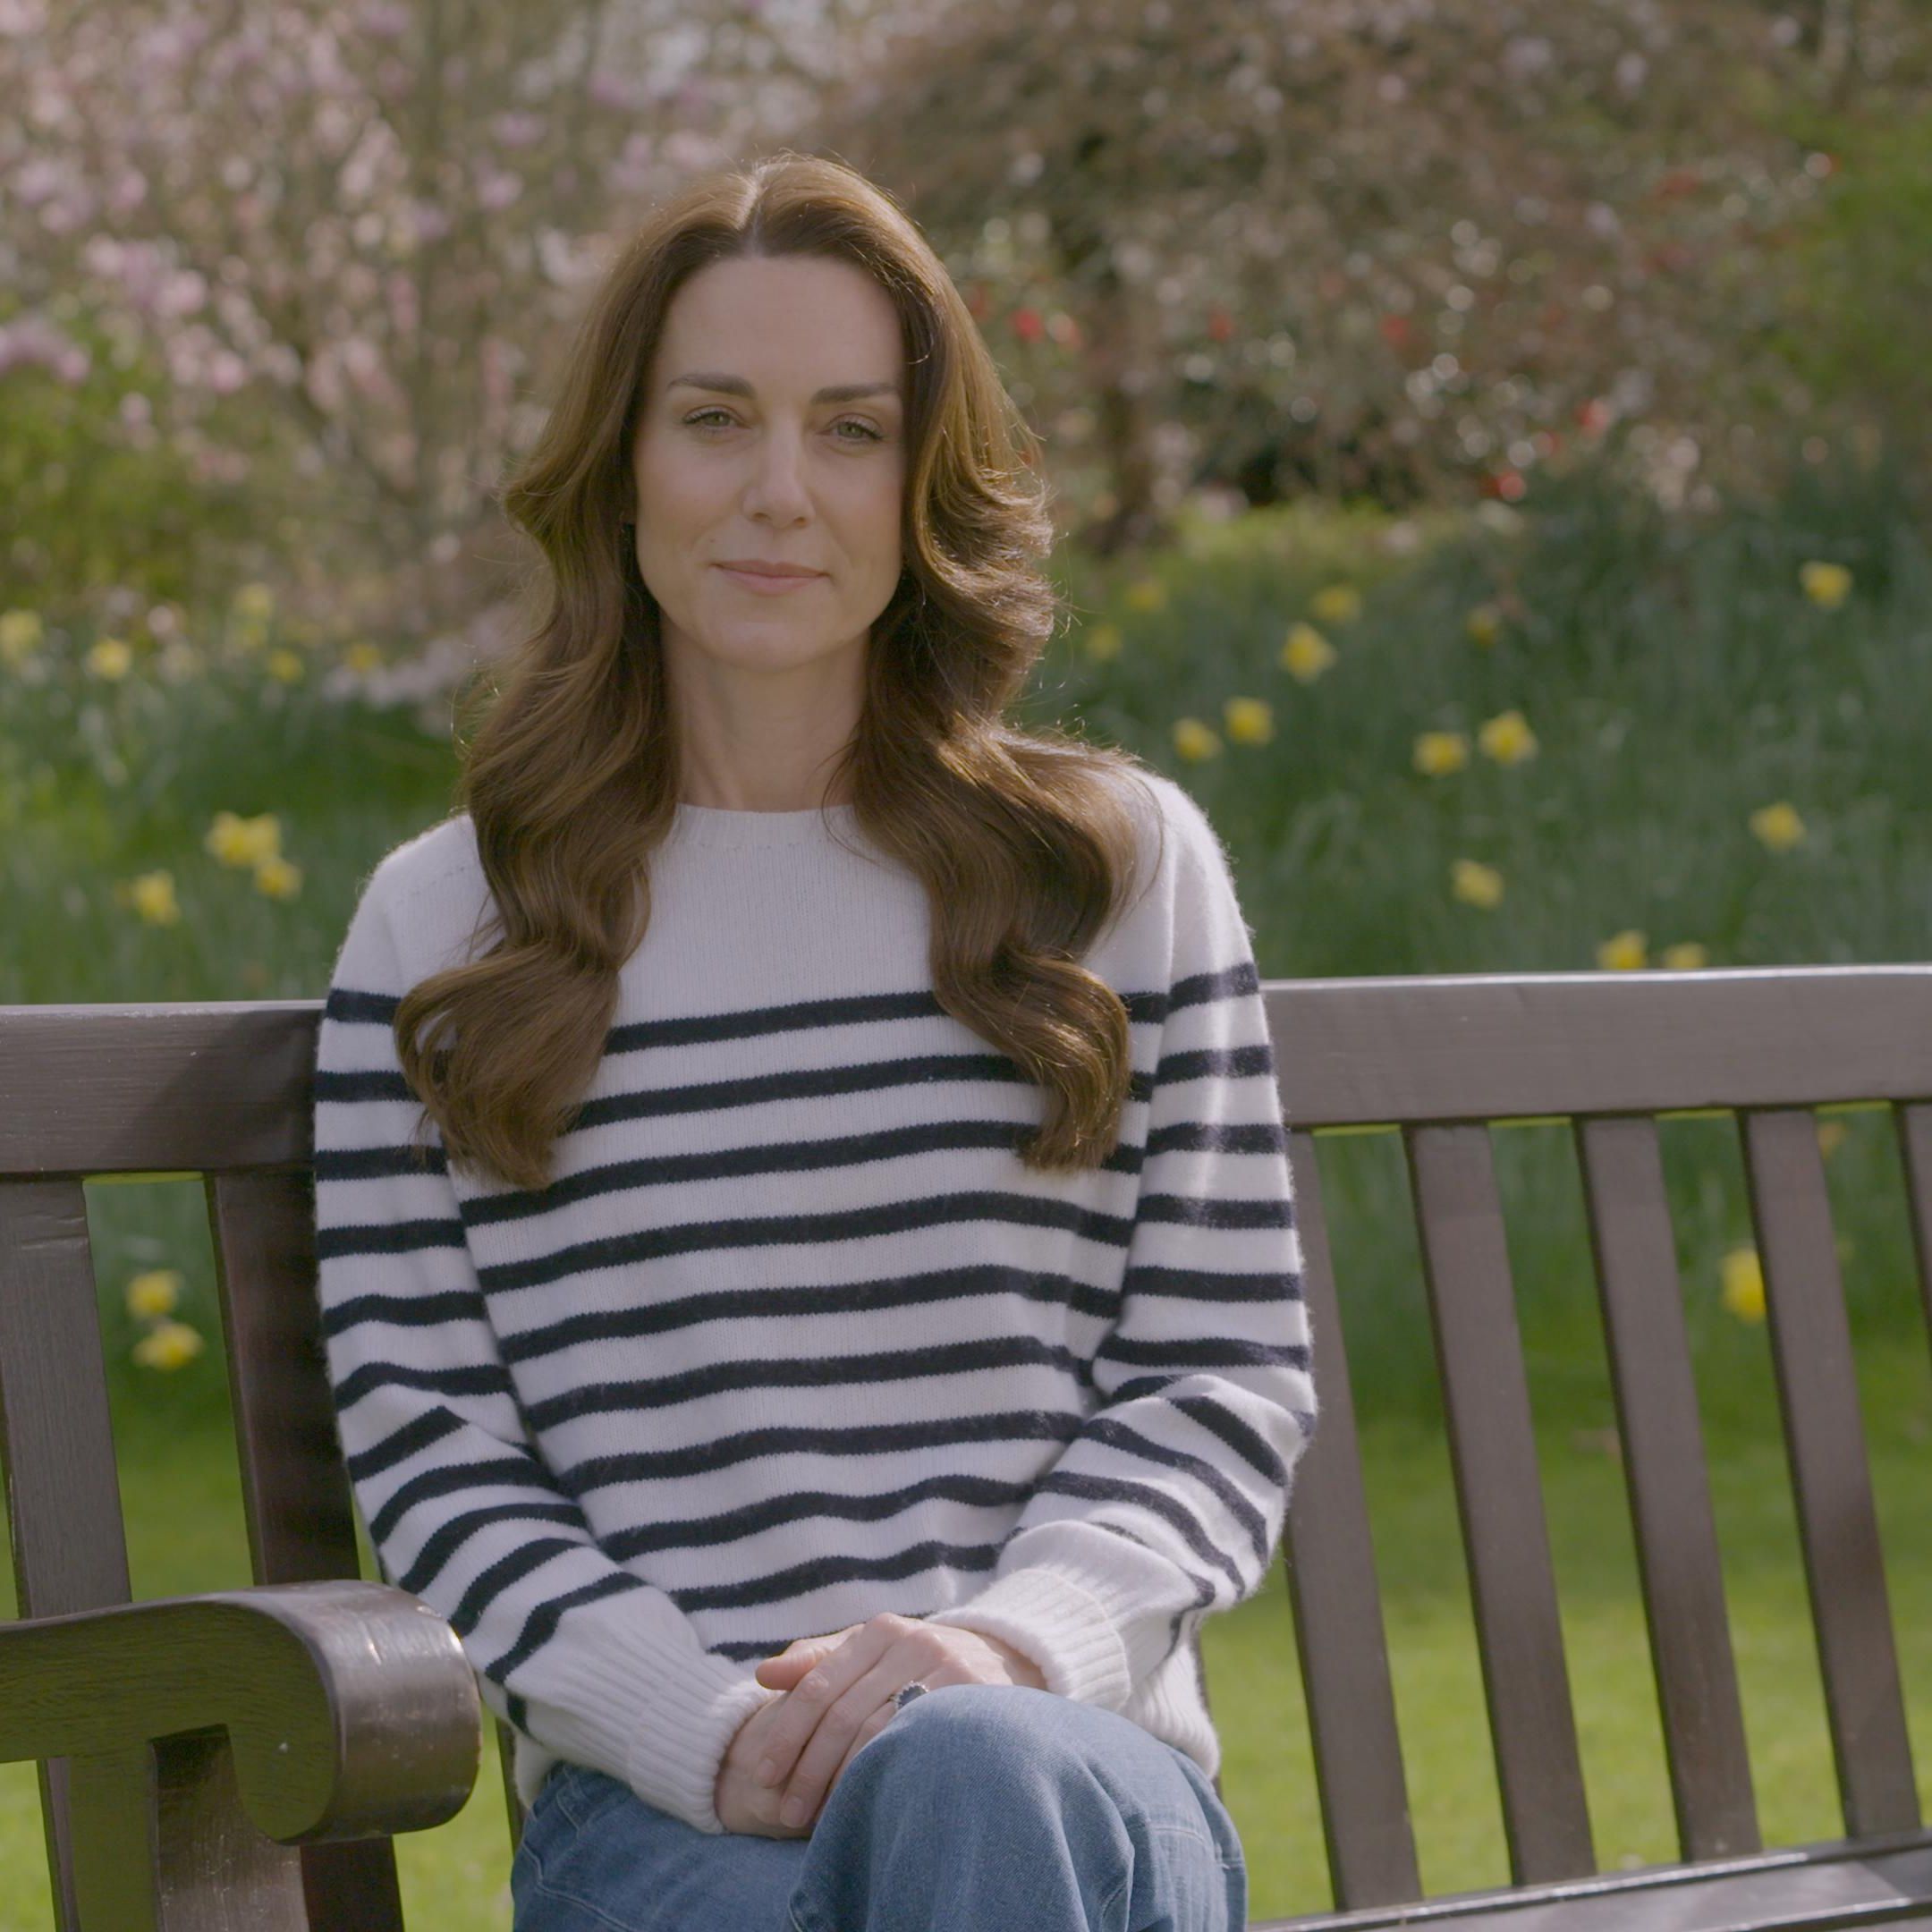 Getty Images Made an Editor's Note to Kate Middleton's Cancer Announcement Video